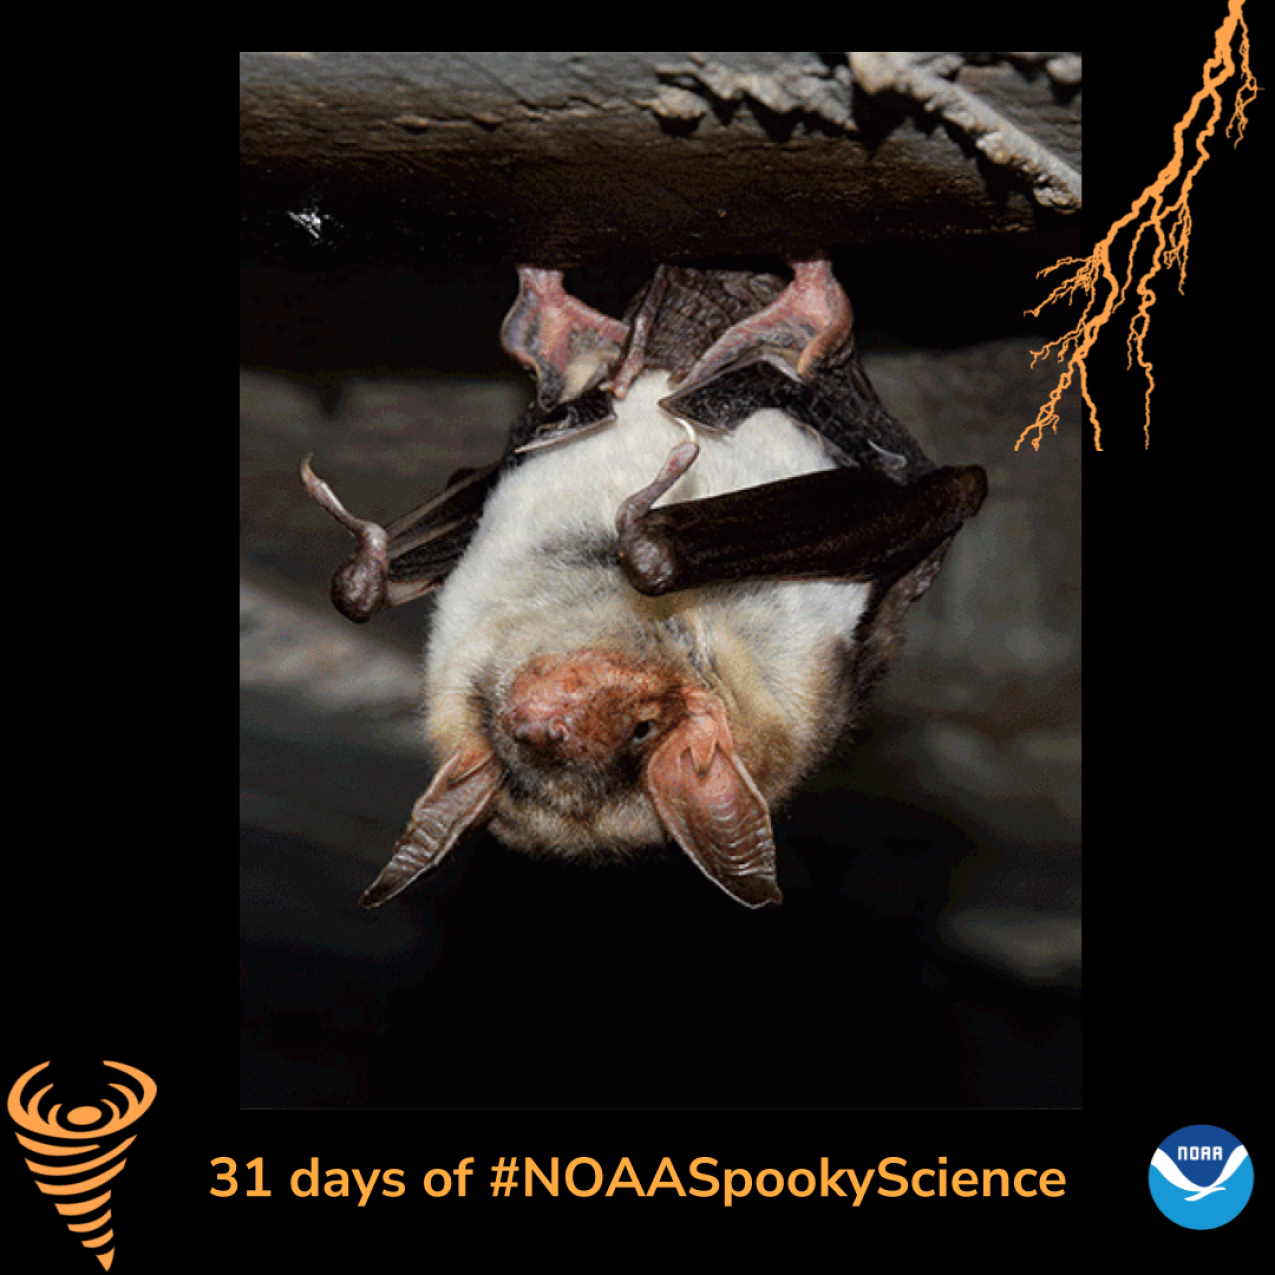 A photo of a bat hanging on a cave. Border of the photo is black with orange atmospheric graphics of a lightning bolt and a tornado. Text: 31 days of #NOAASpookyScience